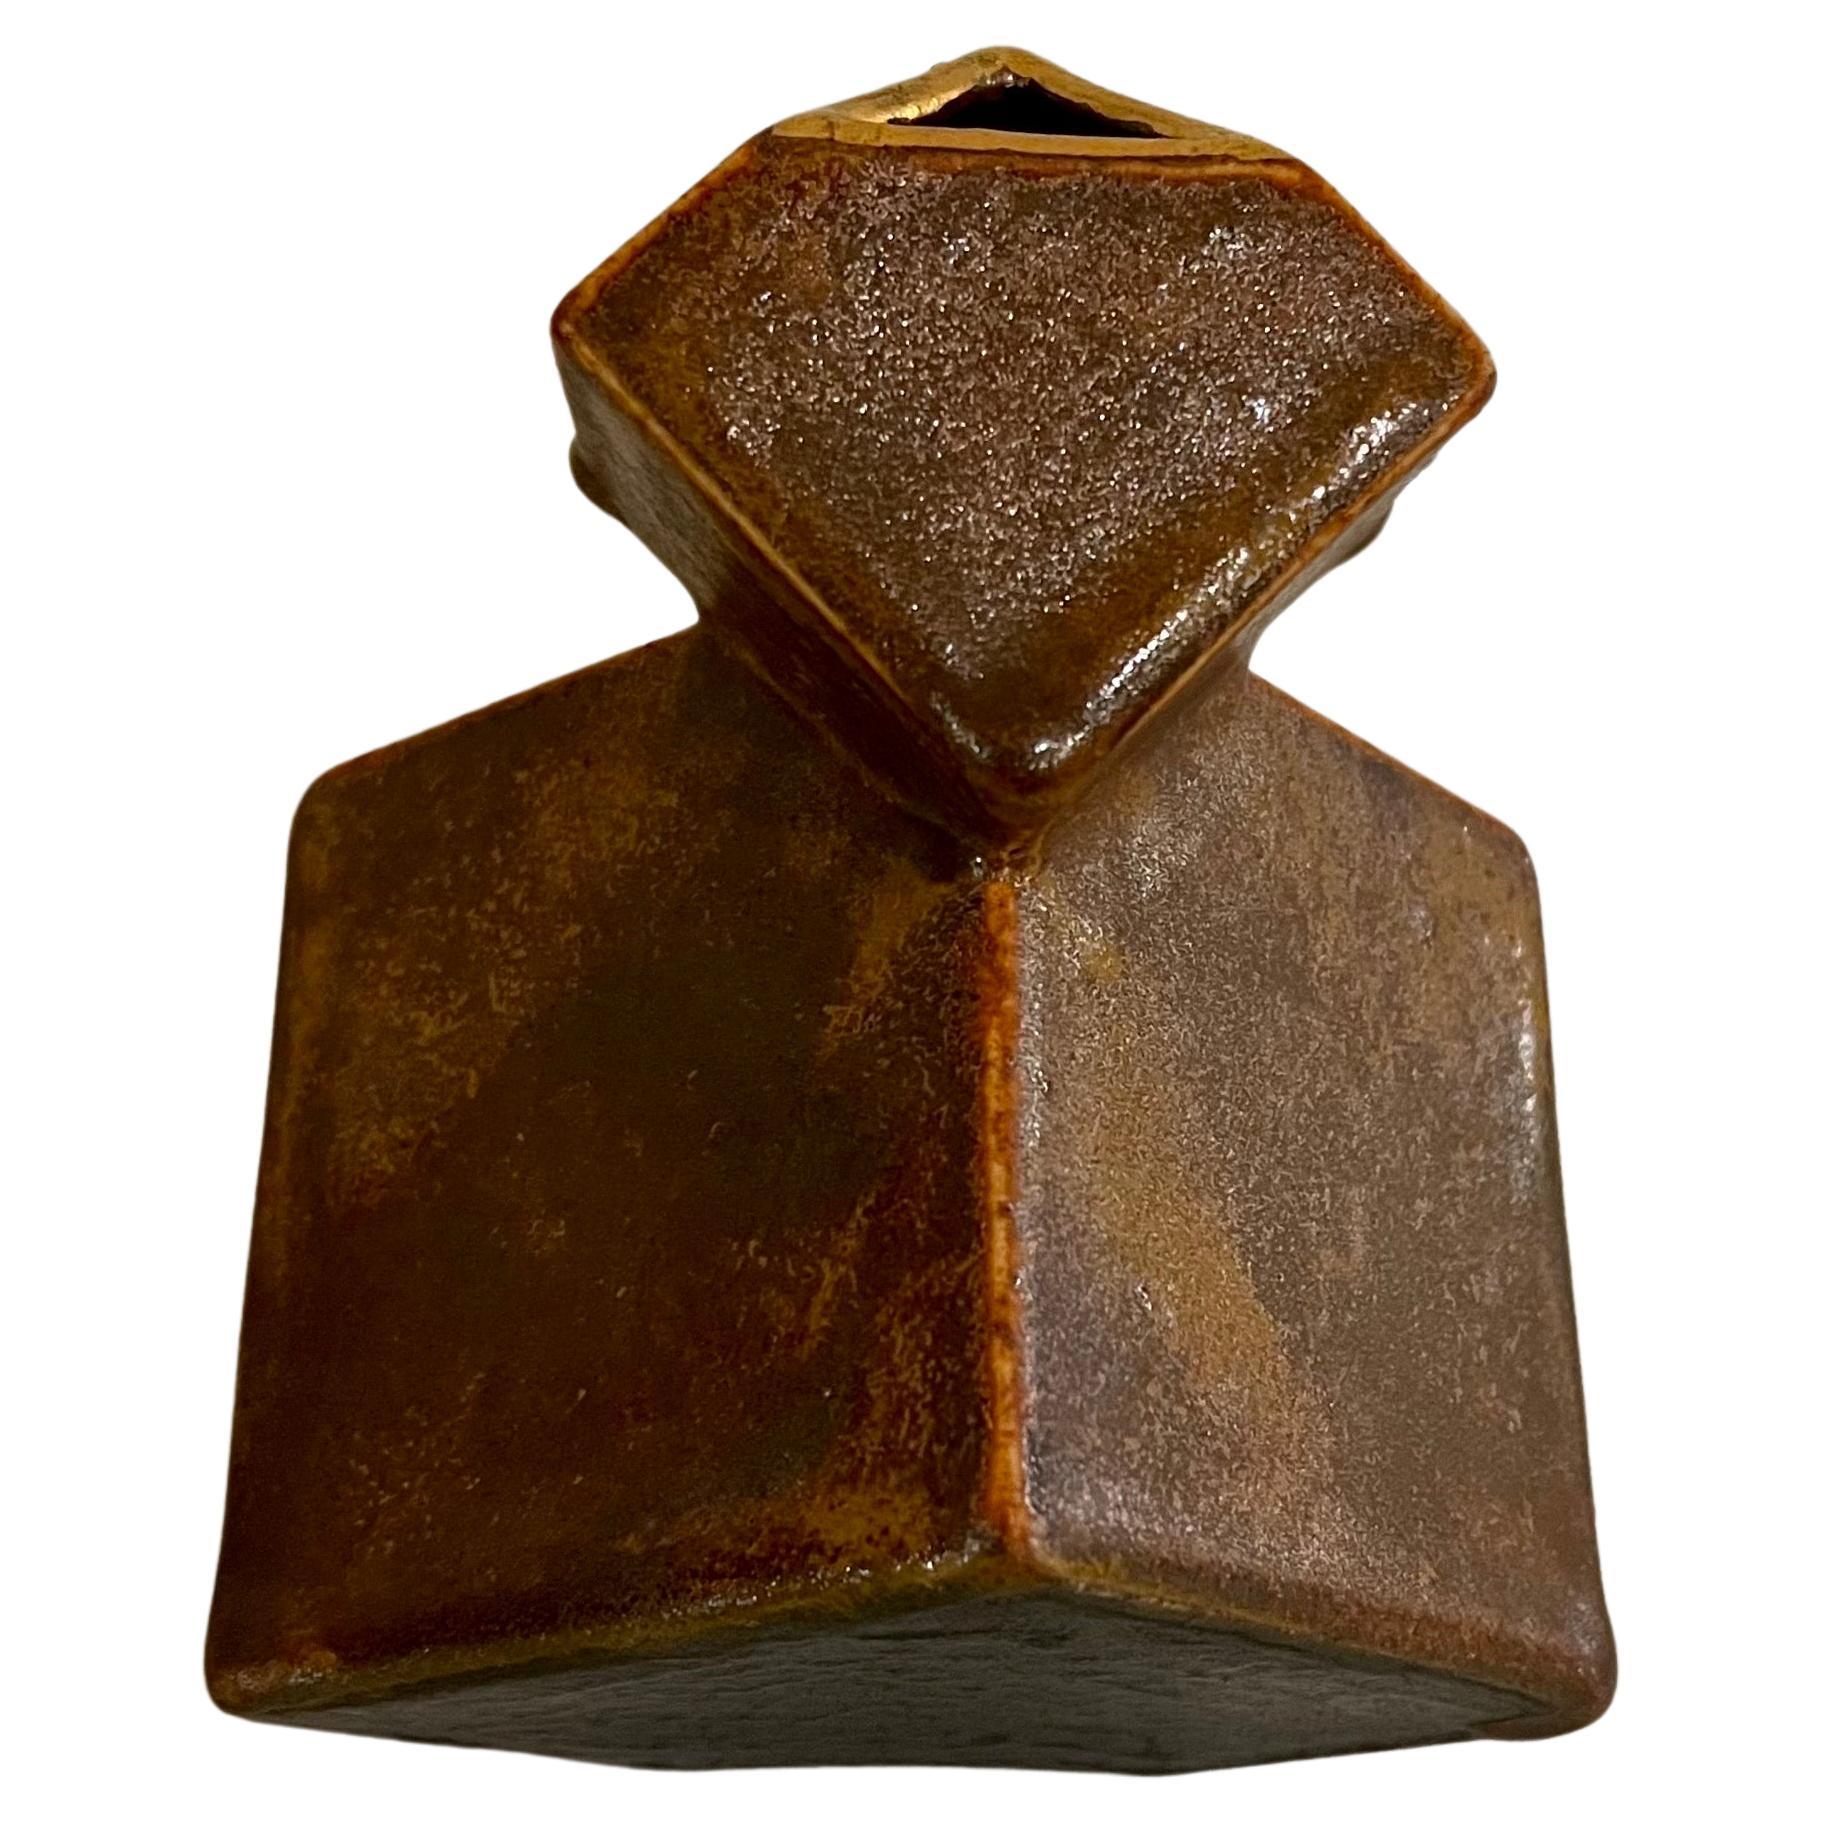 California Design Geometric Cube Vase Maroon by Pierre Bounaud  In Excellent Condition For Sale In San Diego, CA